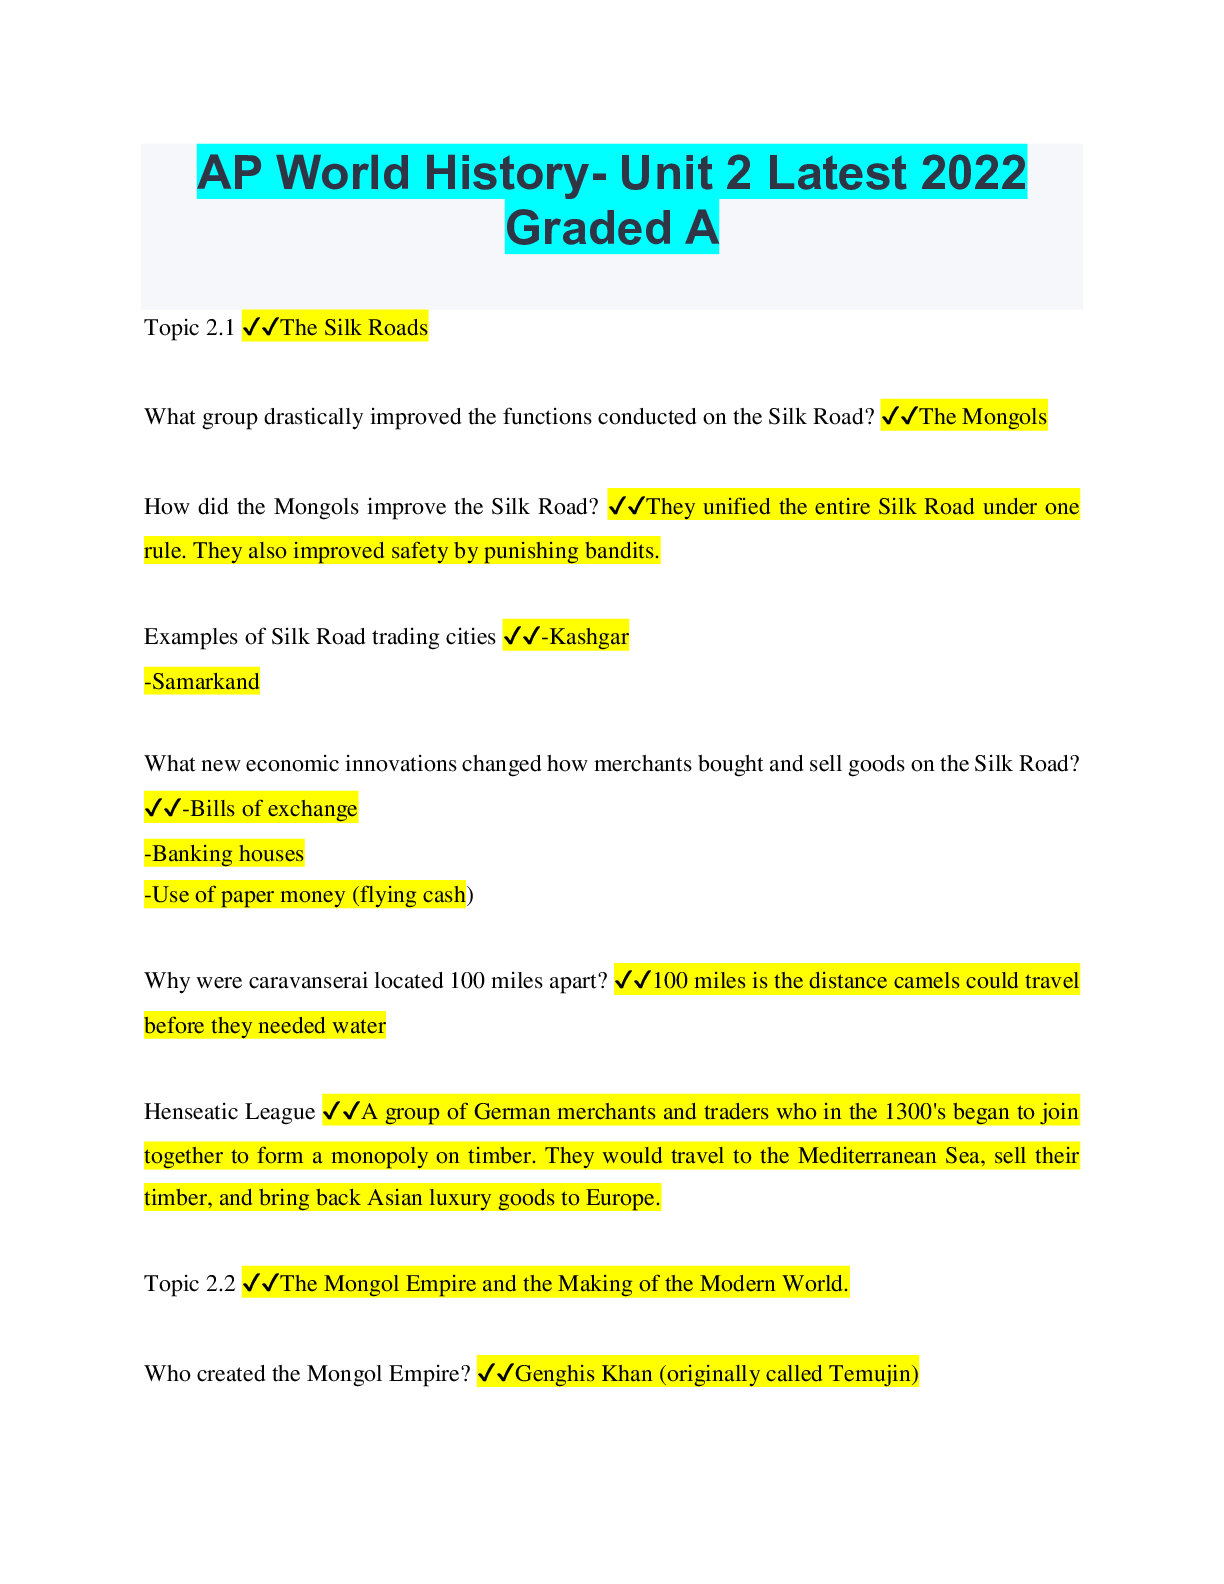 AP World History Unit 2 Latest 2022 Graded A Browsegrades